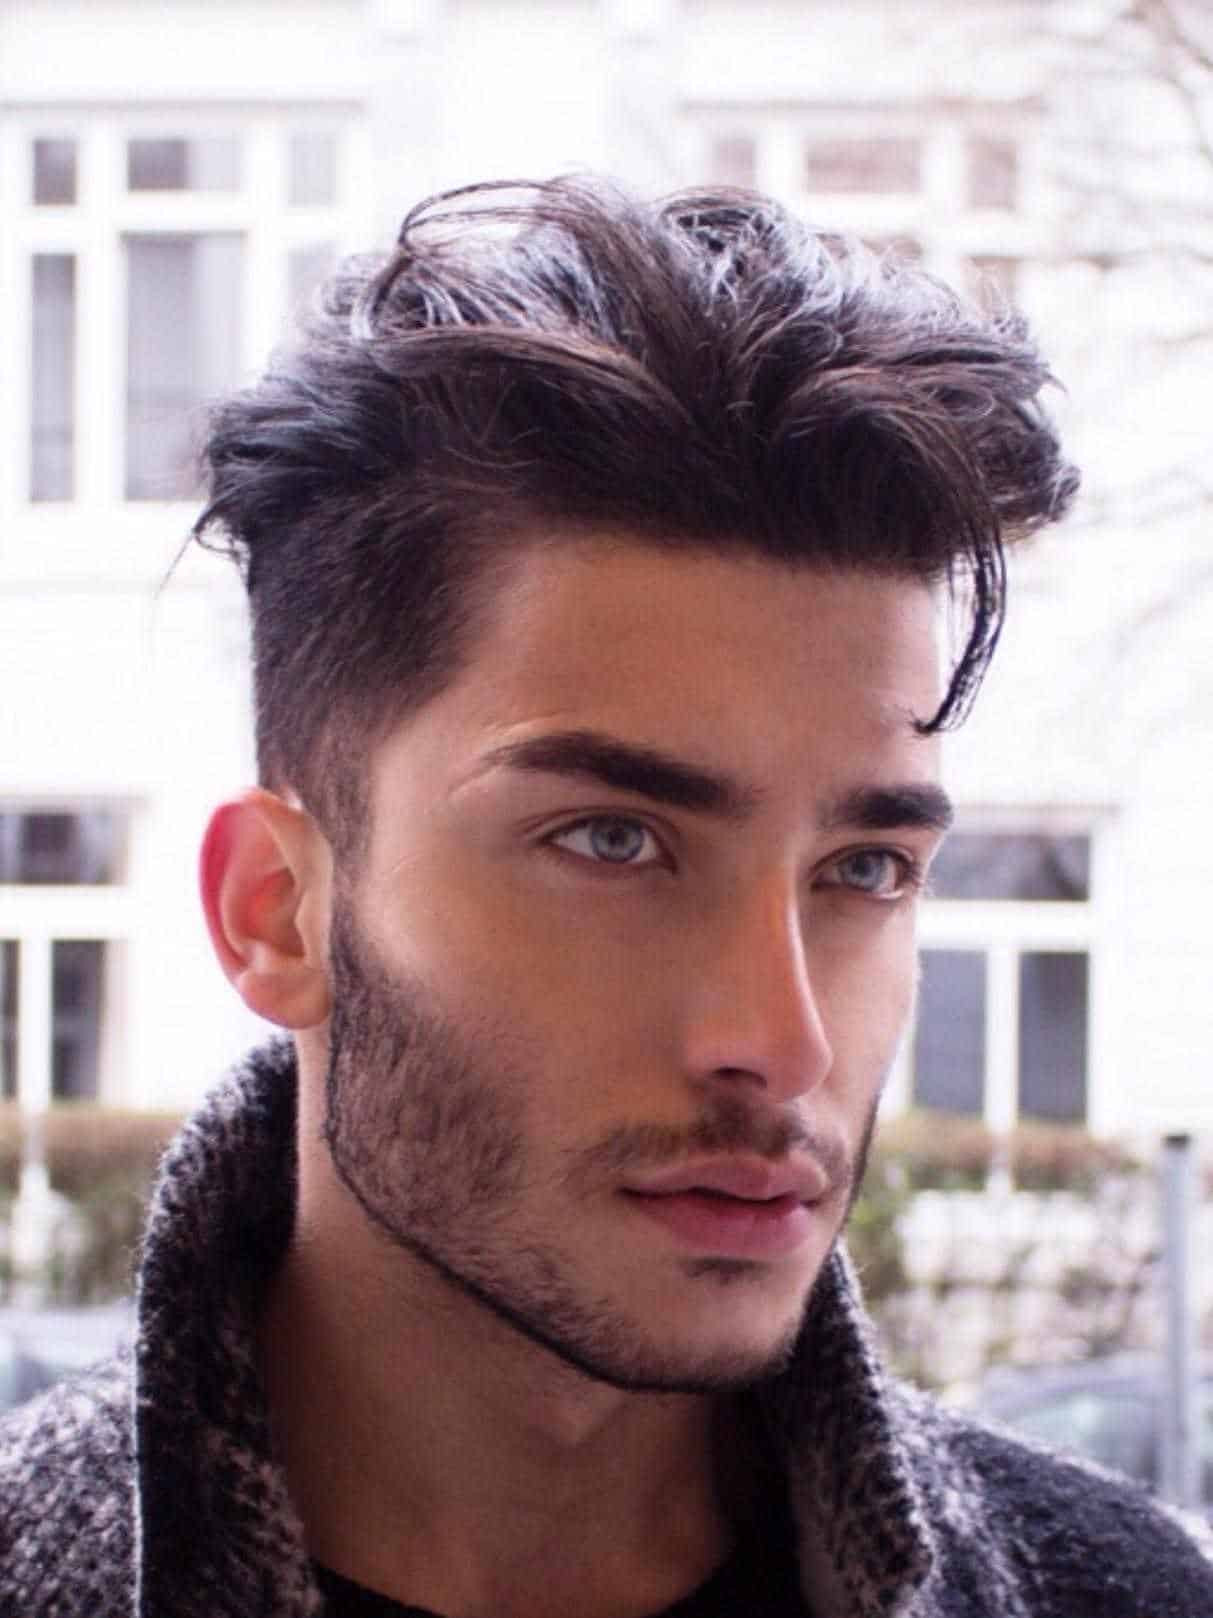 Gq Mens Haircuts
 Top 10 Men s Grooming Products For 2018 Royal Grooming